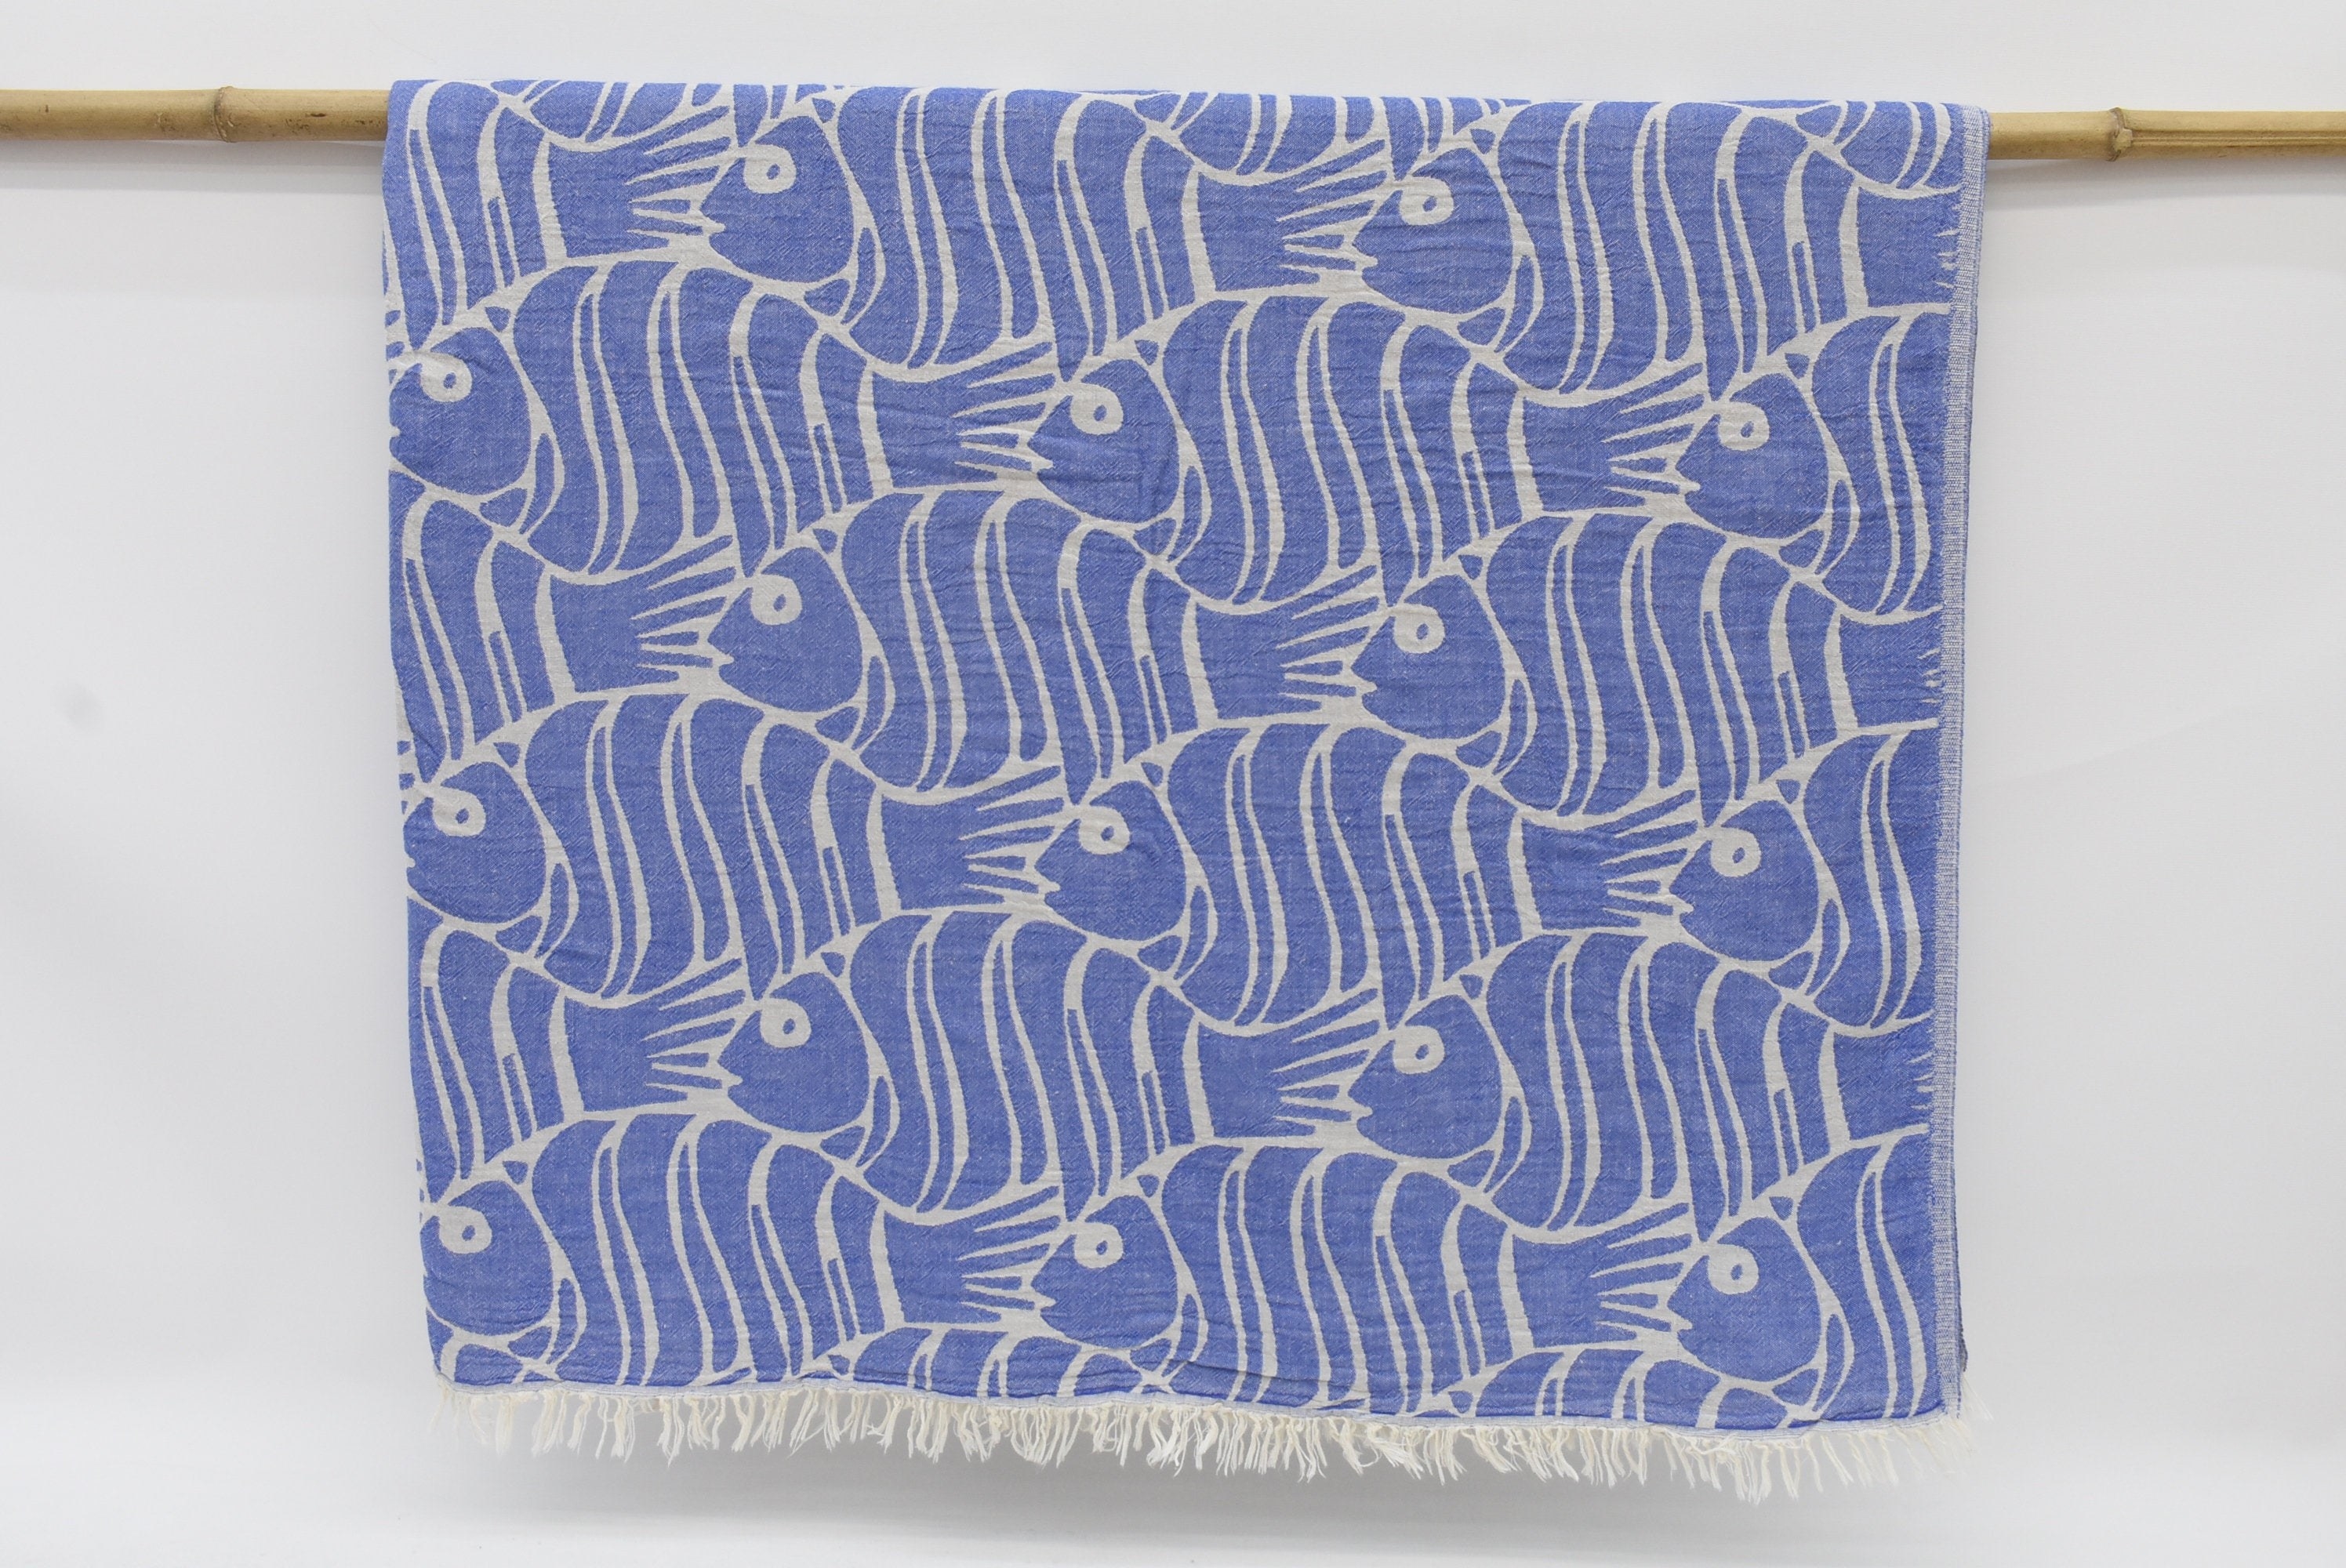 A blue fish-patterned throw blanket against grey background 